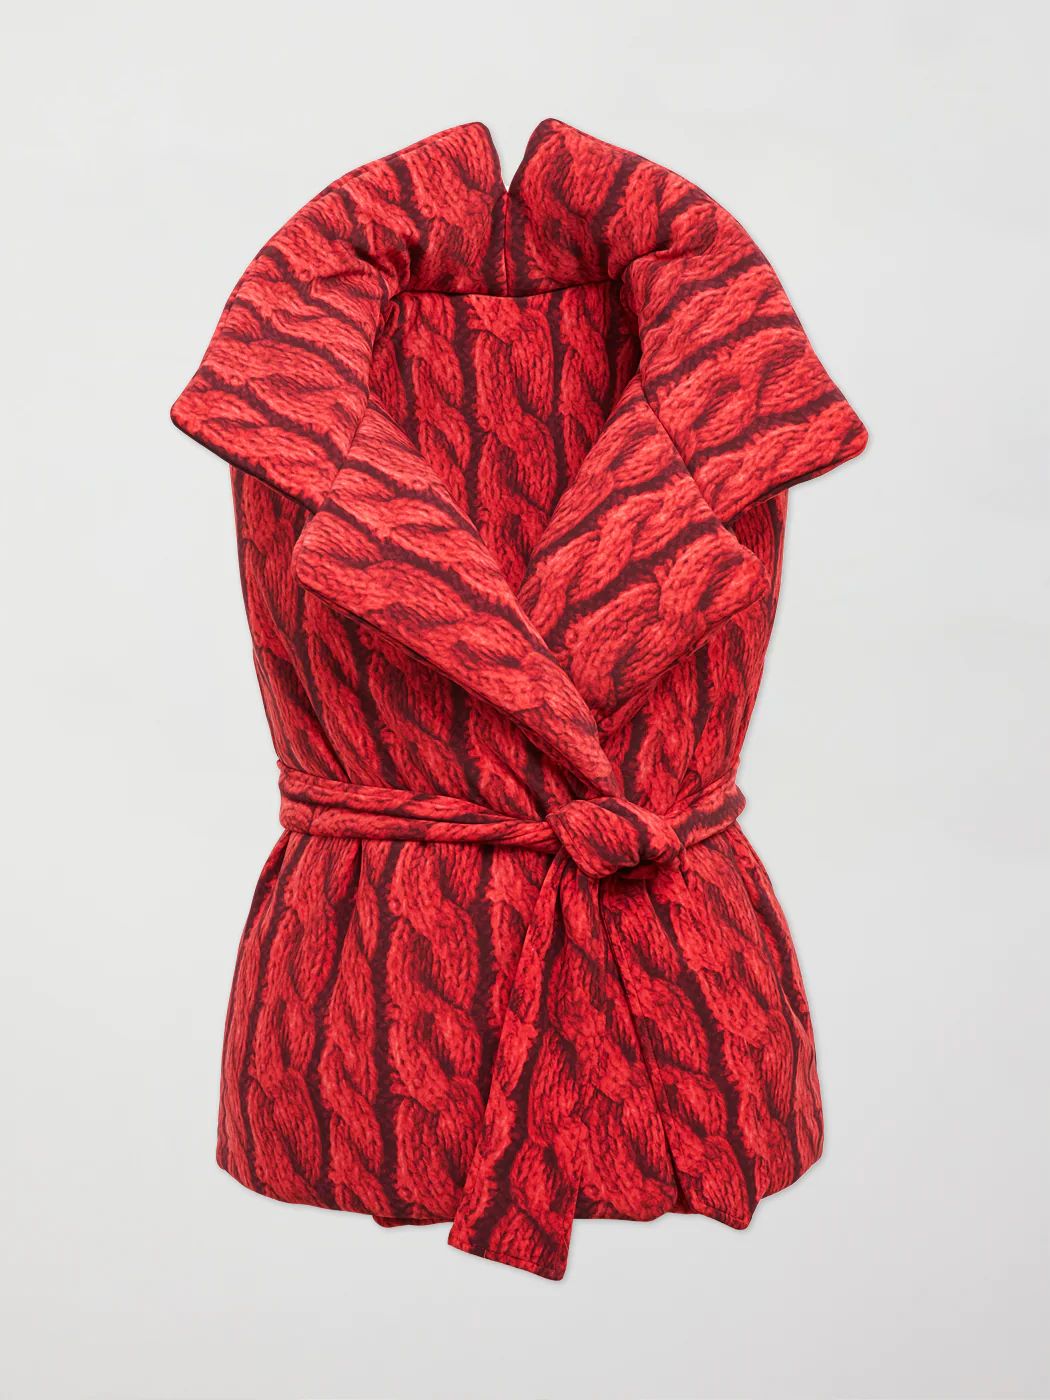 Sleeveless Sleeping Bag Vest - RED CABLE | Carbon38